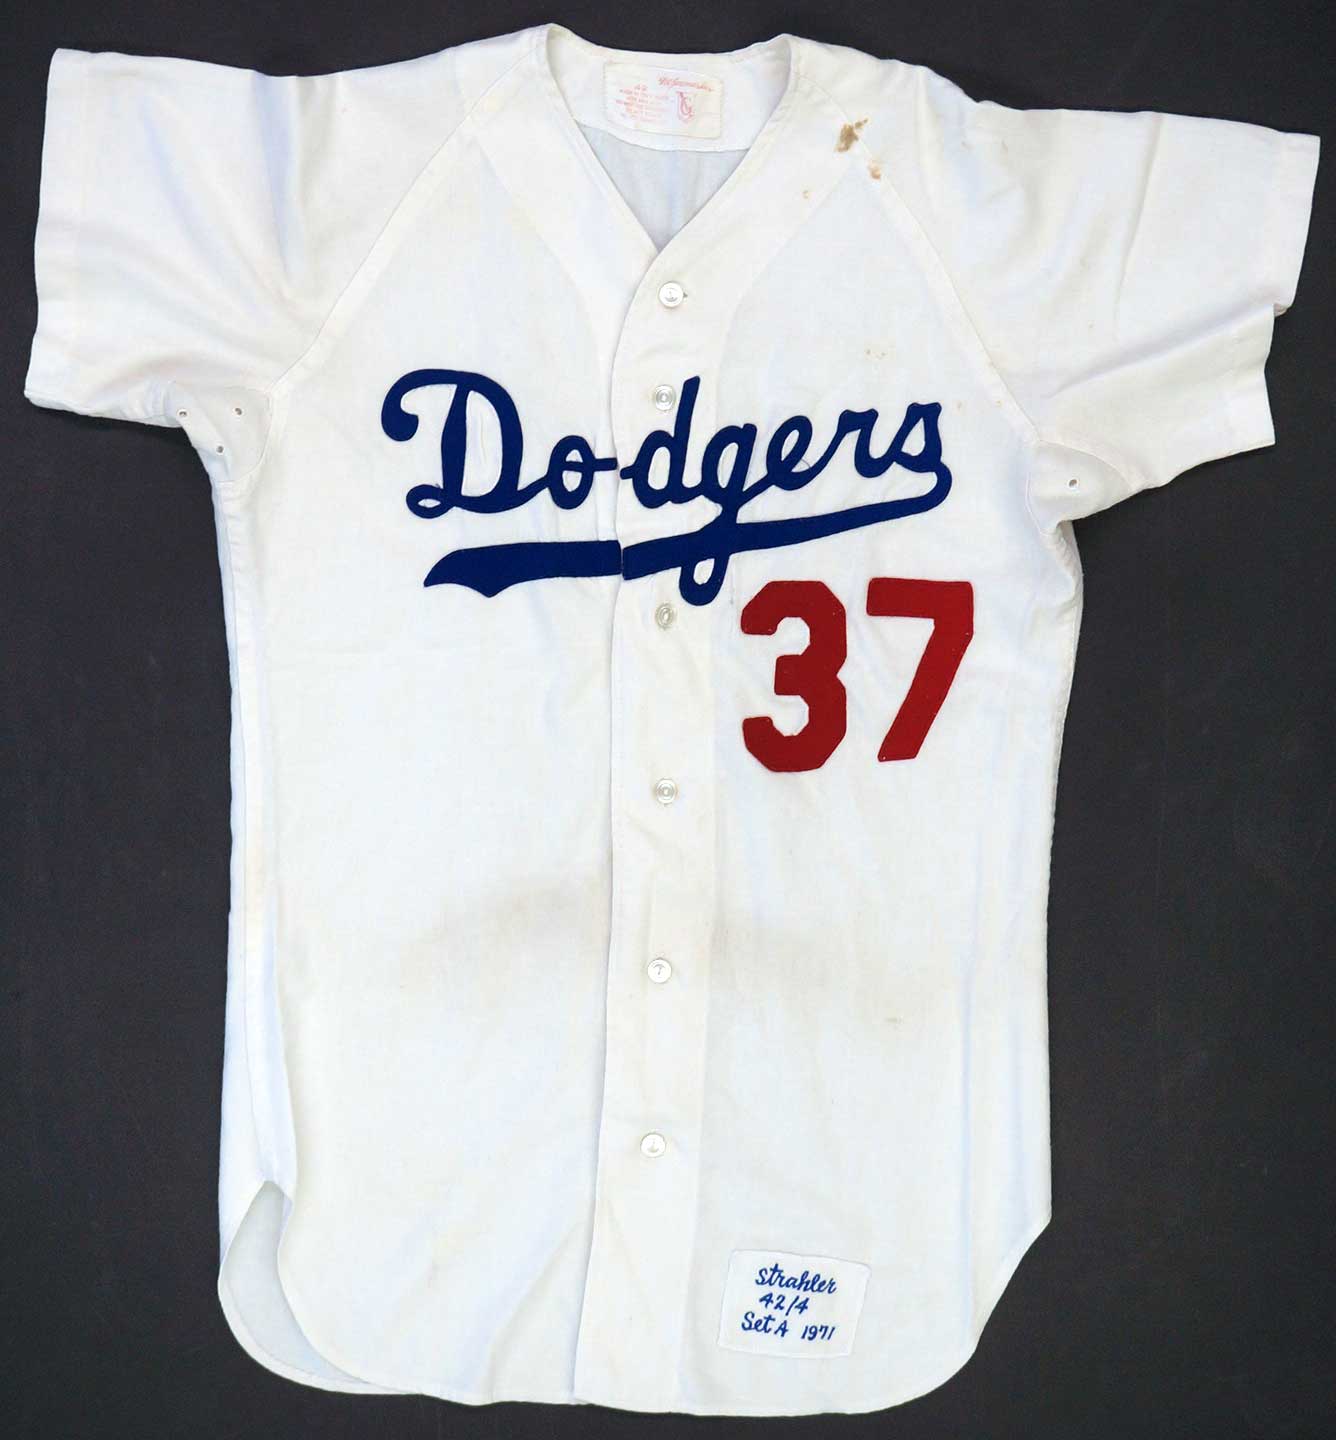 Mike Strahler 1971 LA Dodgers Game Used jersey